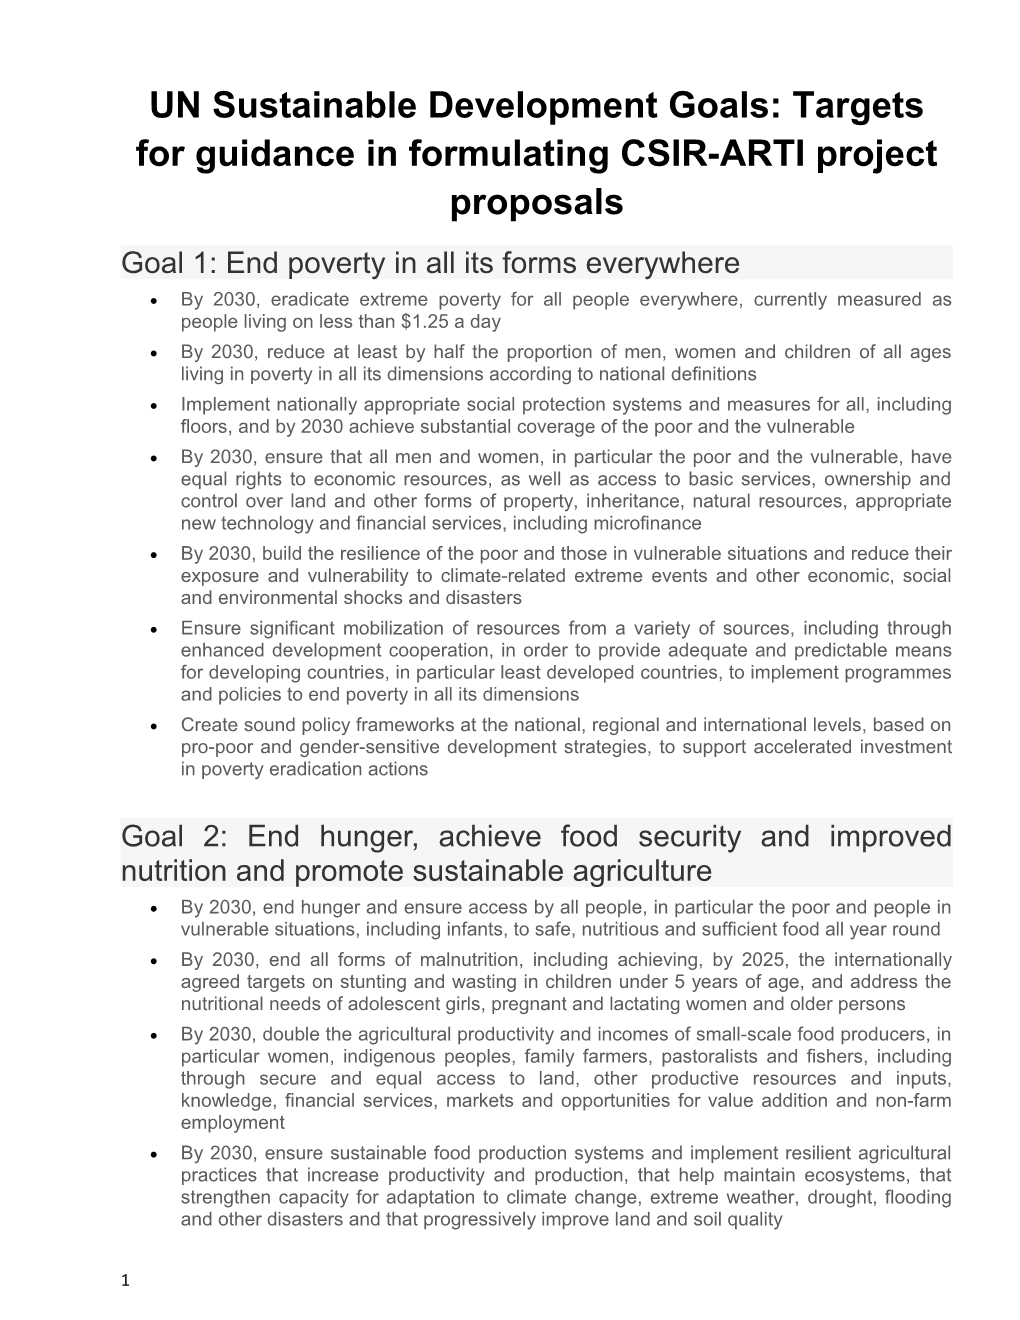 UN Sustainable Development Goals: Targets for Guidance in Formulating CSIR-ARTI Project